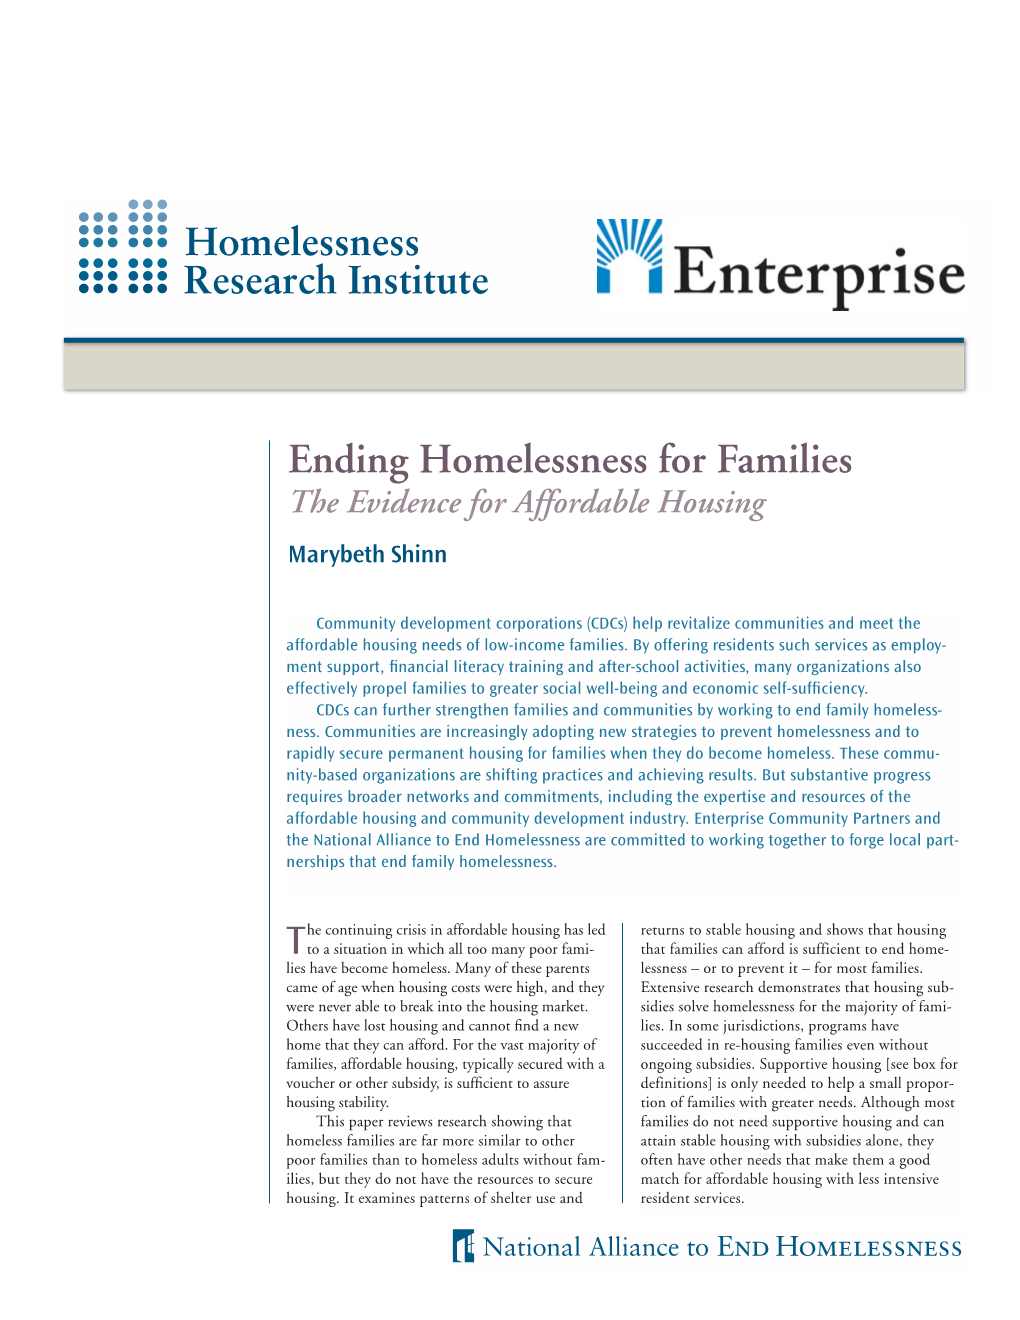 Ending Homelessness for Families: the Evidence for Affordable Housing